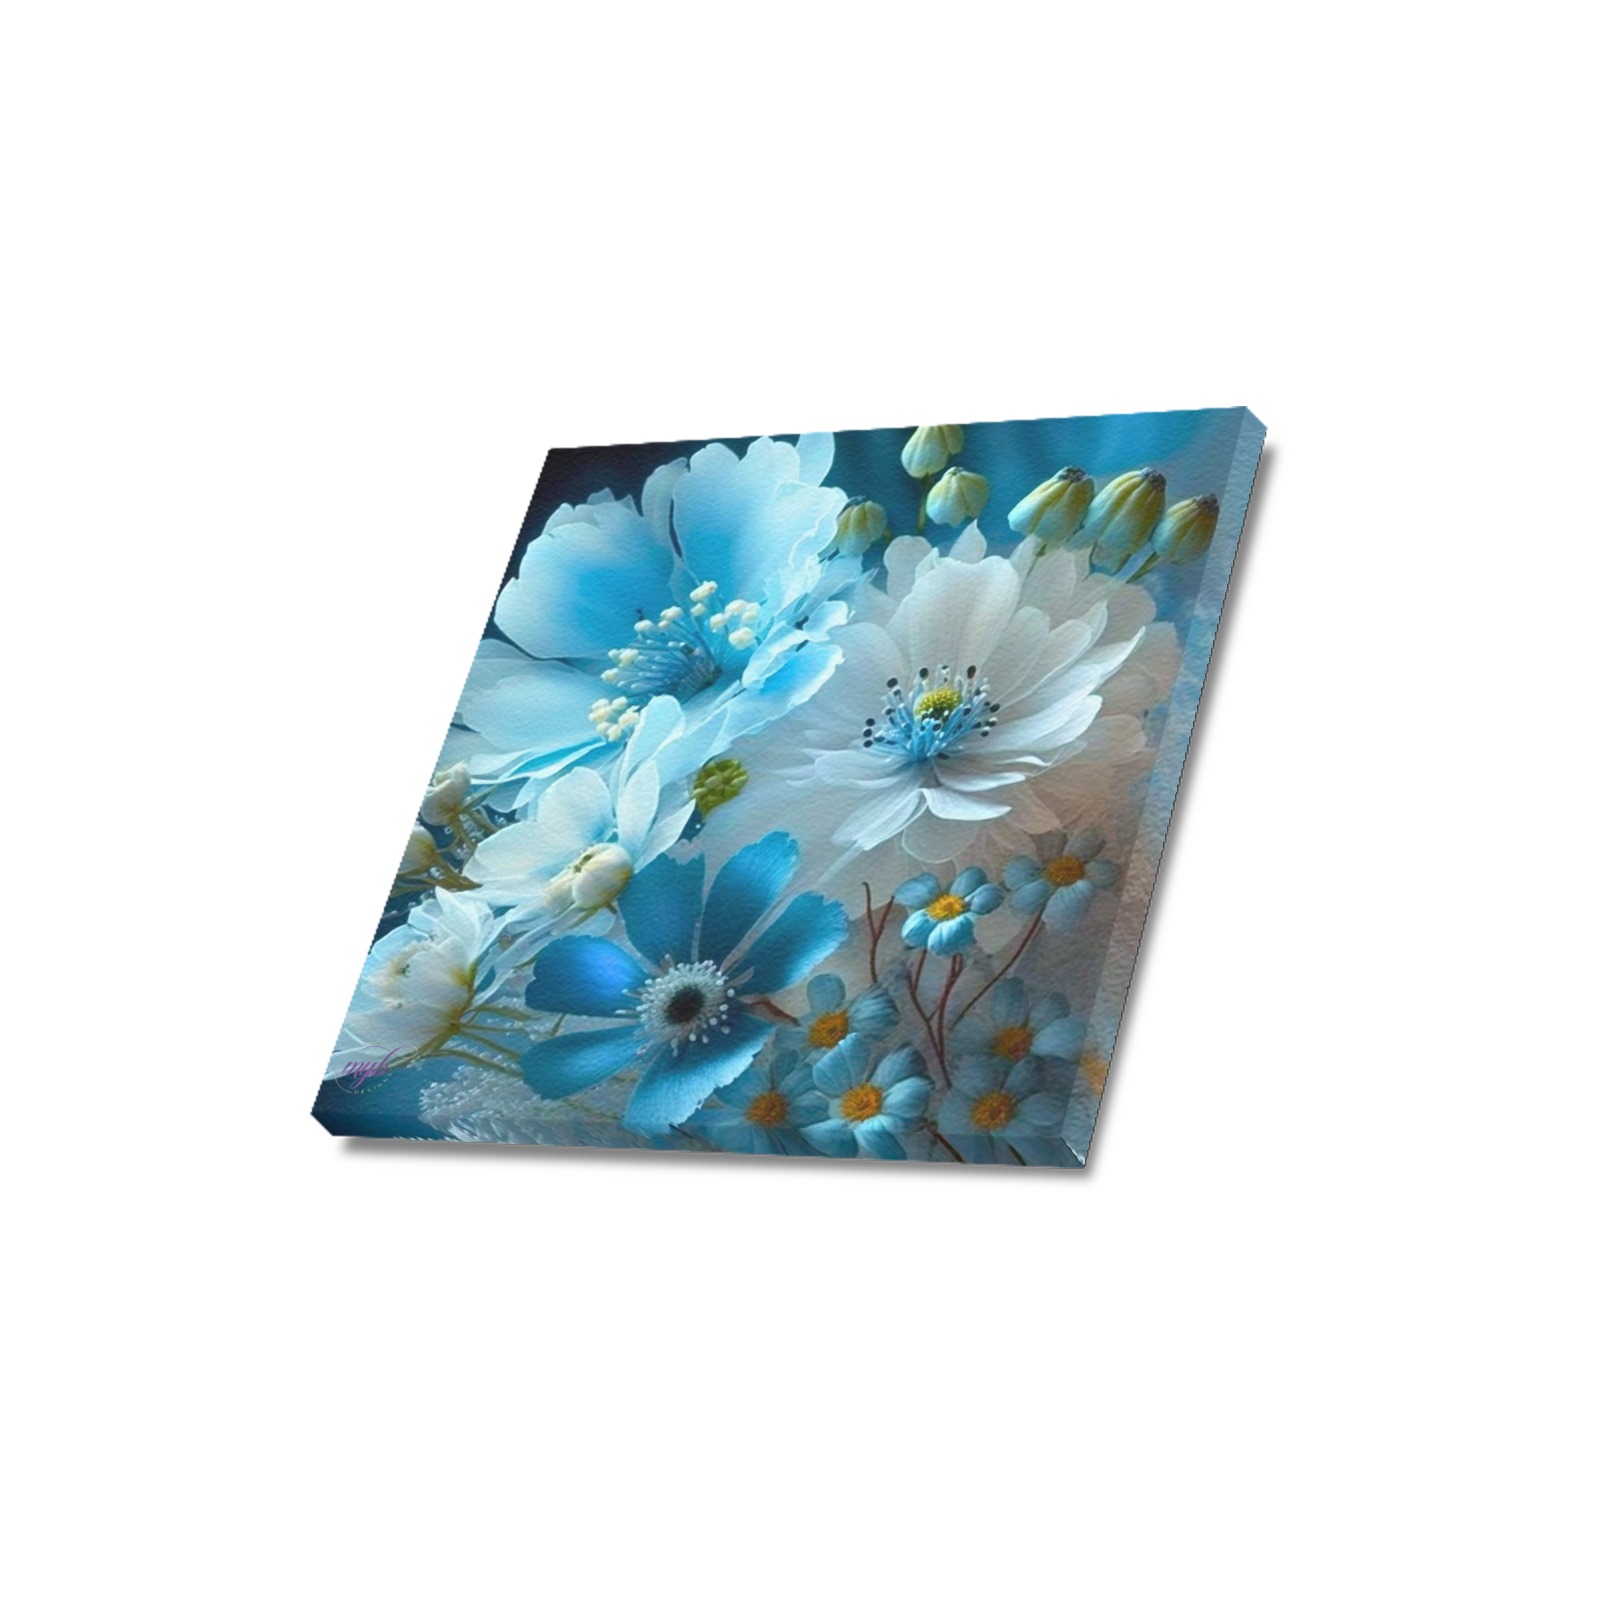 April Showers bring May Flowers Upgraded Canvas Print 16"x16"